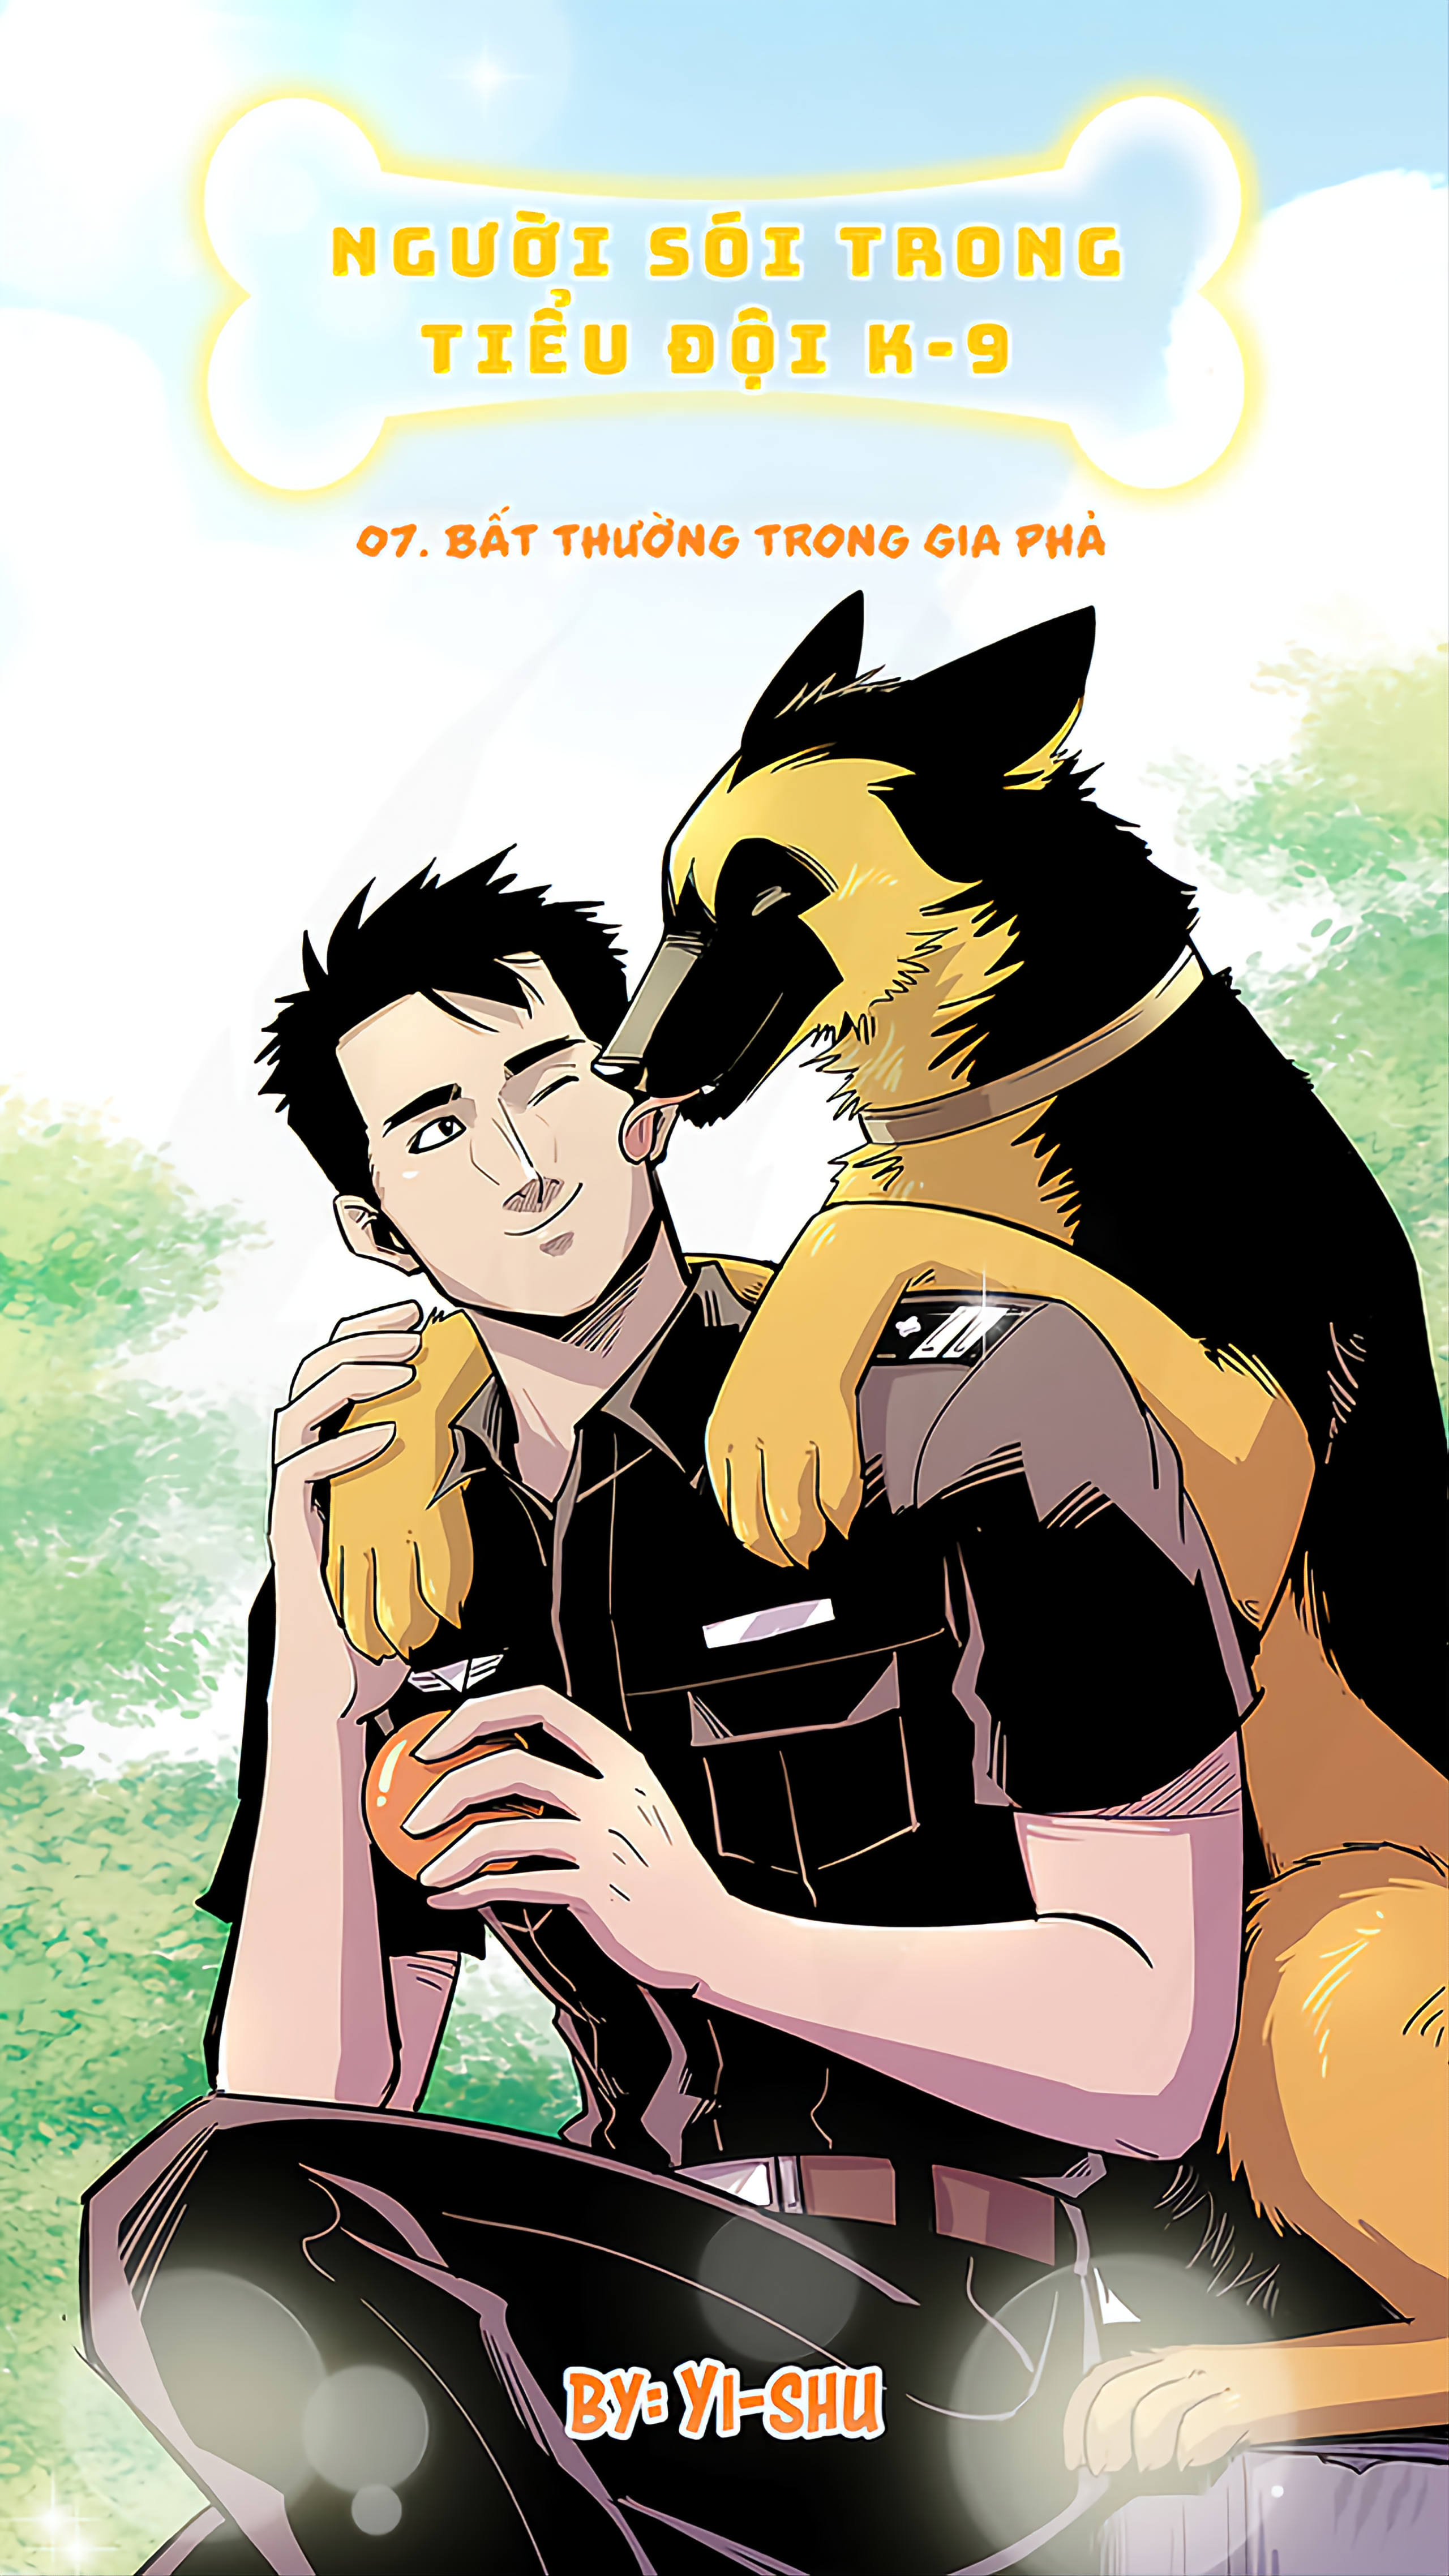 Werewolf In The K-9 Squad / ch.7 - Trang 1